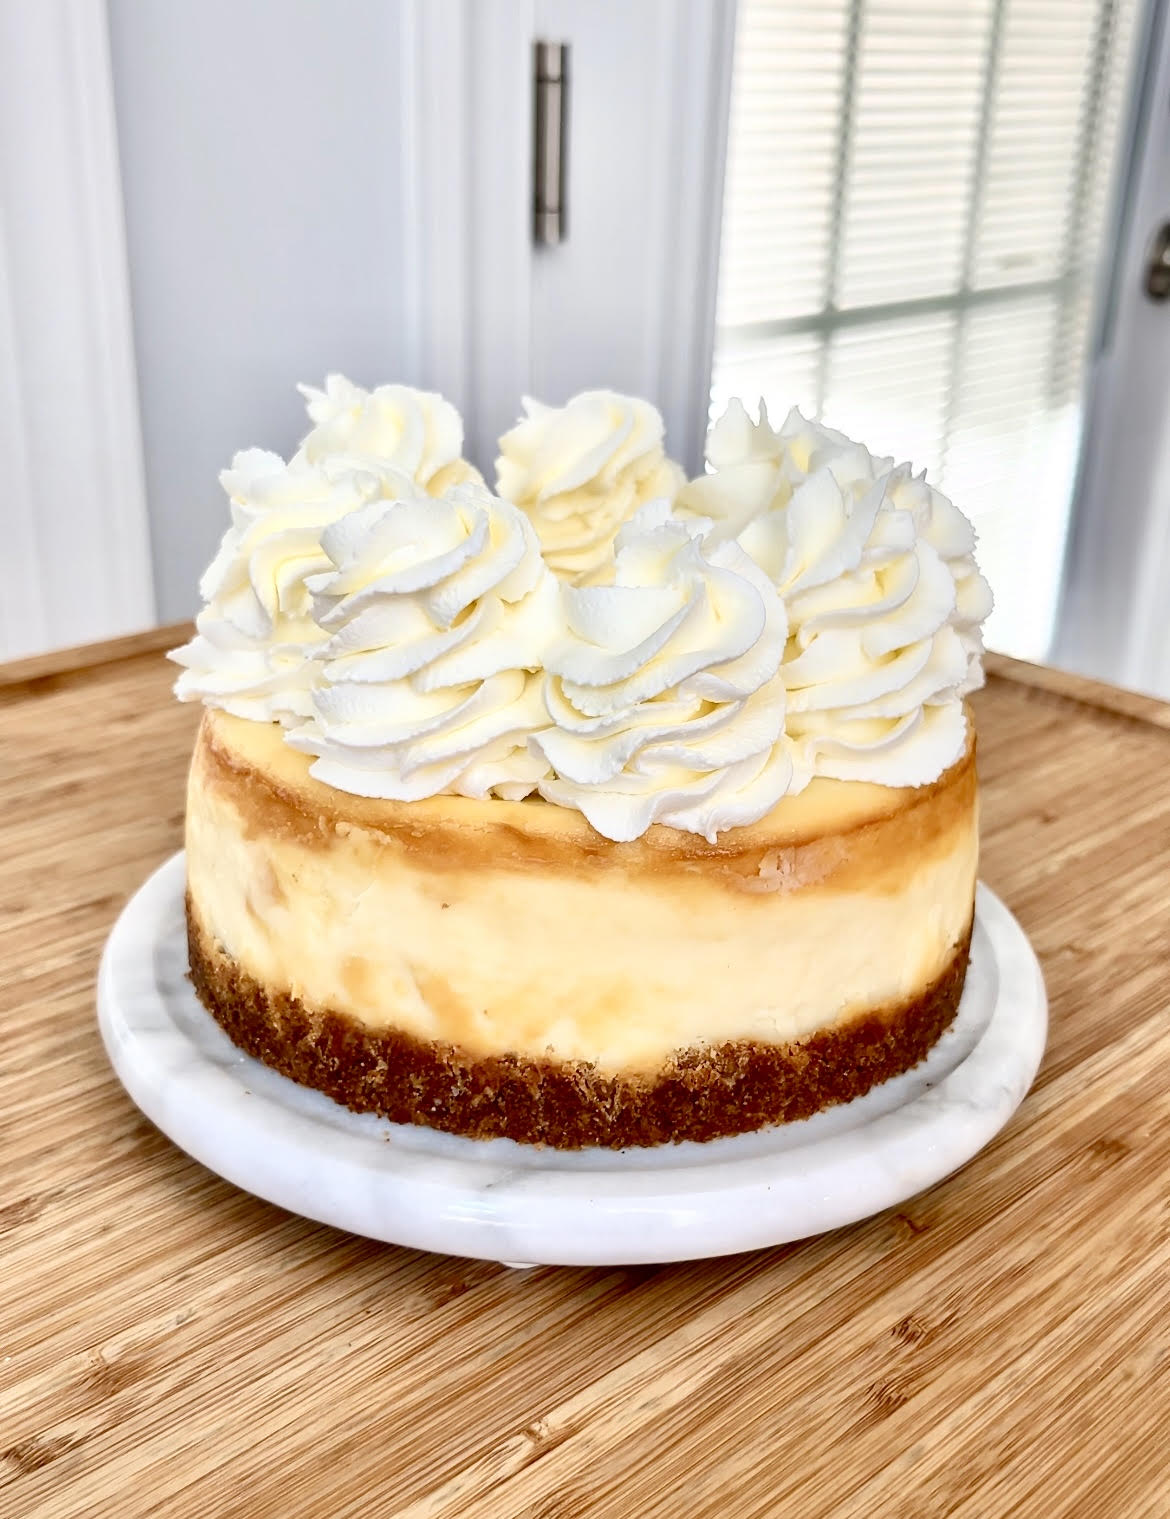 Cheesecake (6 inch) PICKUP ONLY SATURDAY MAY 11